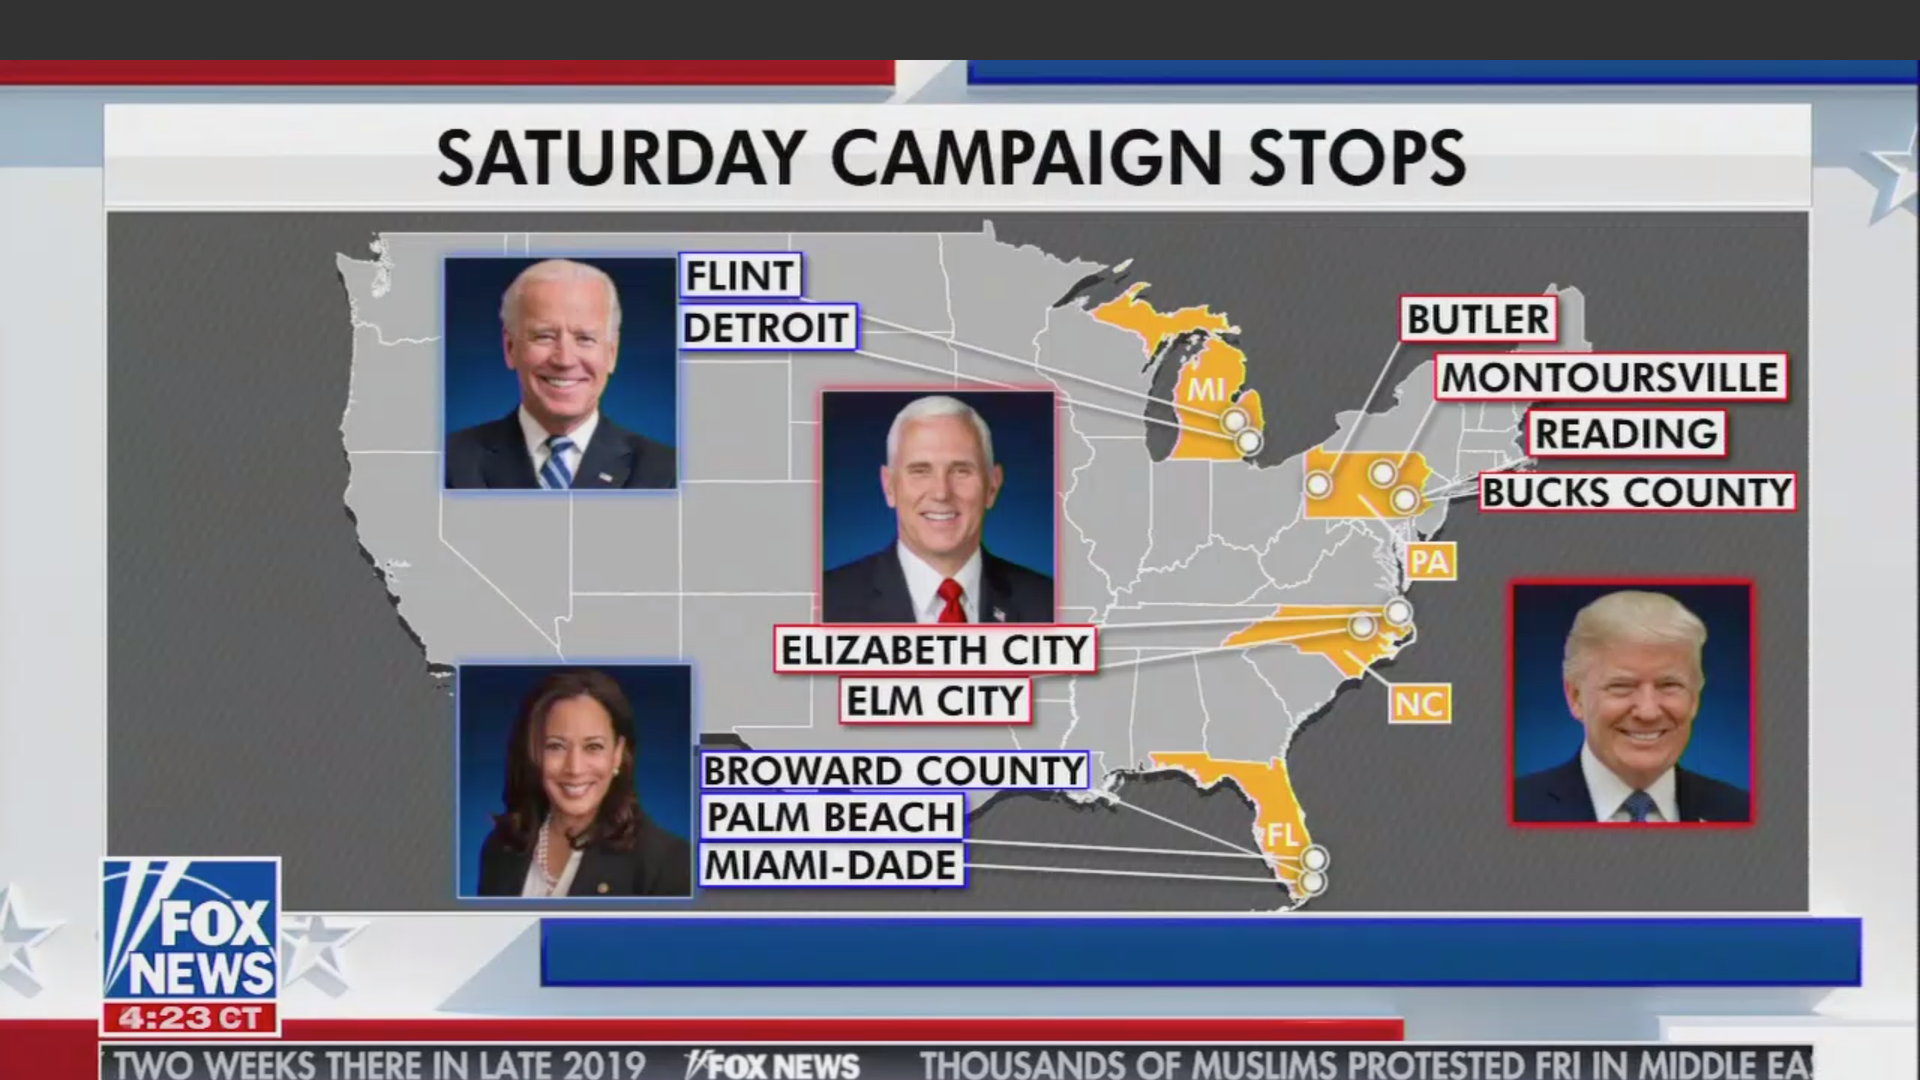 A fox news photo showing the stops